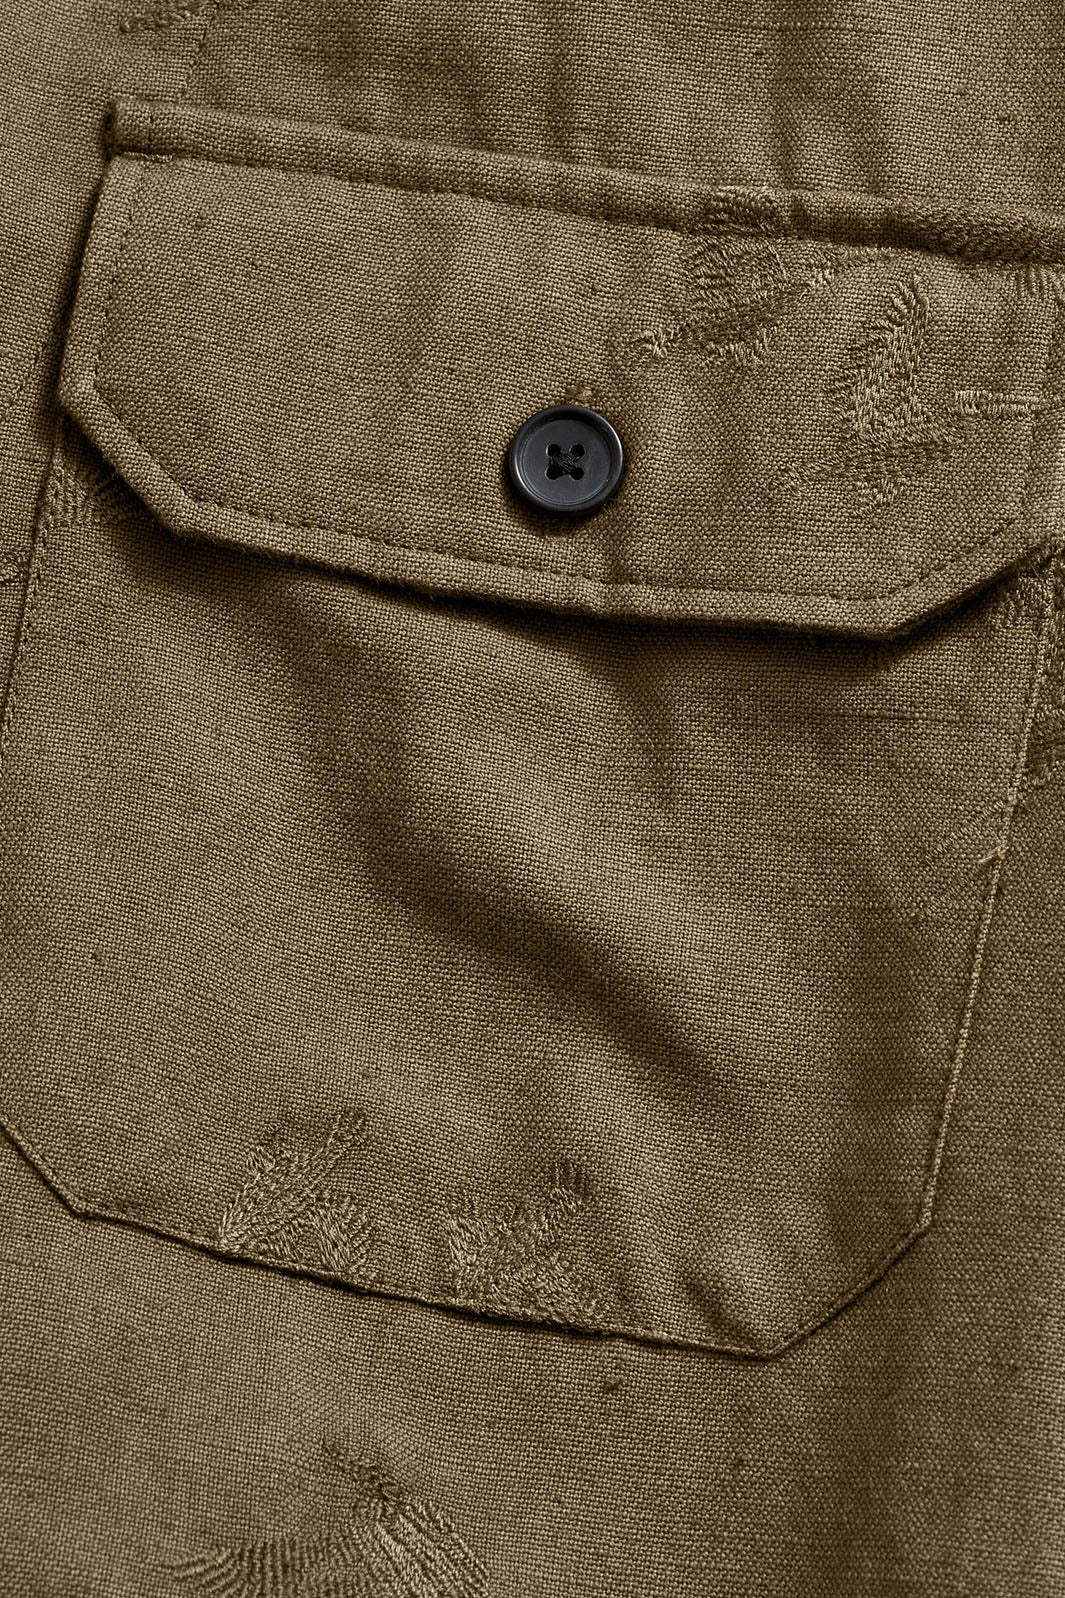 Pelican Gulf Embroidered Overshirt - Olive